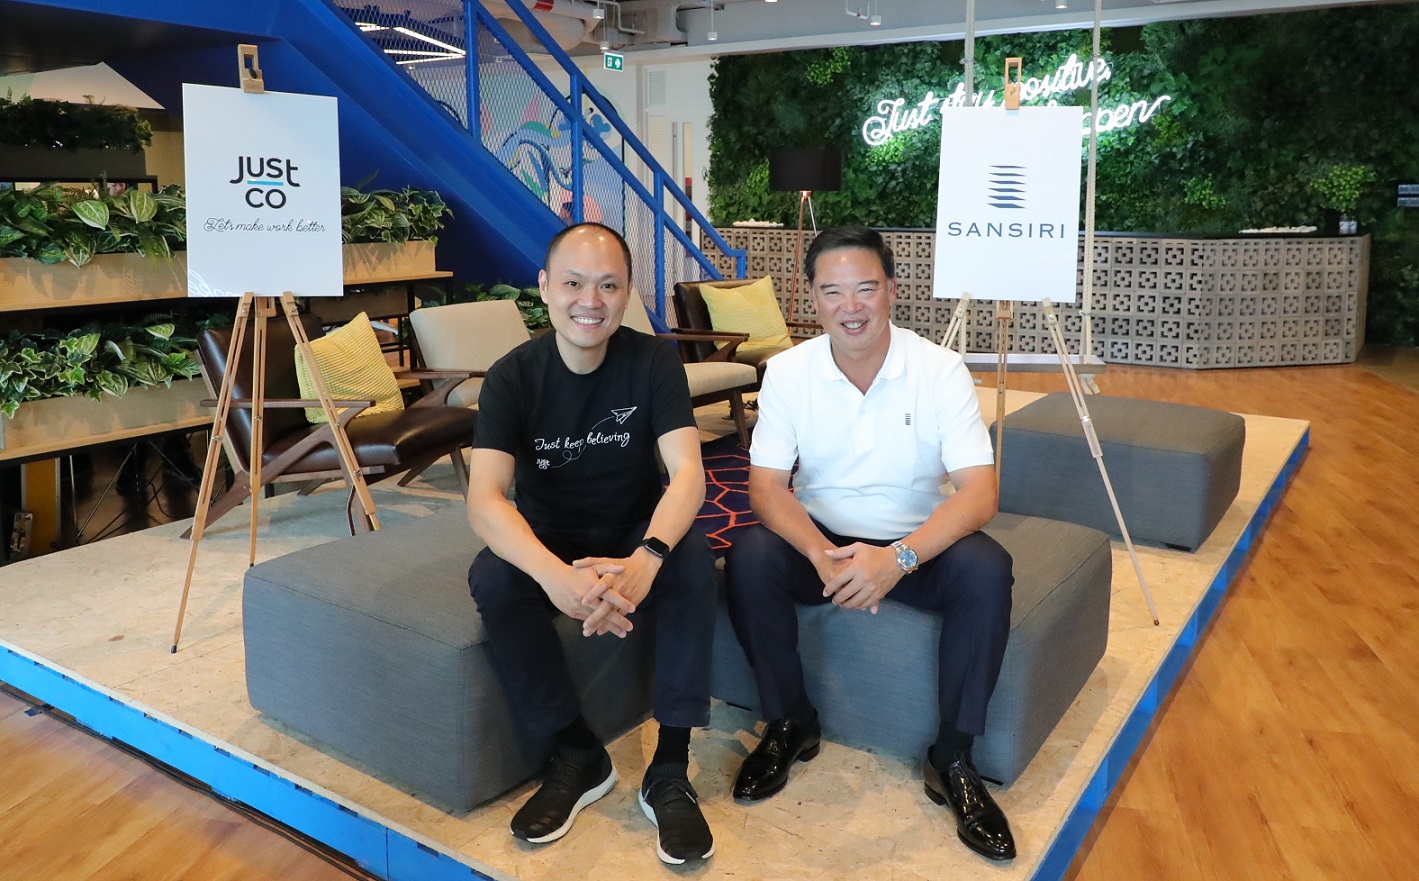 JustCo, Sansiri celebrate the opening of the largest co-working space in Thailand